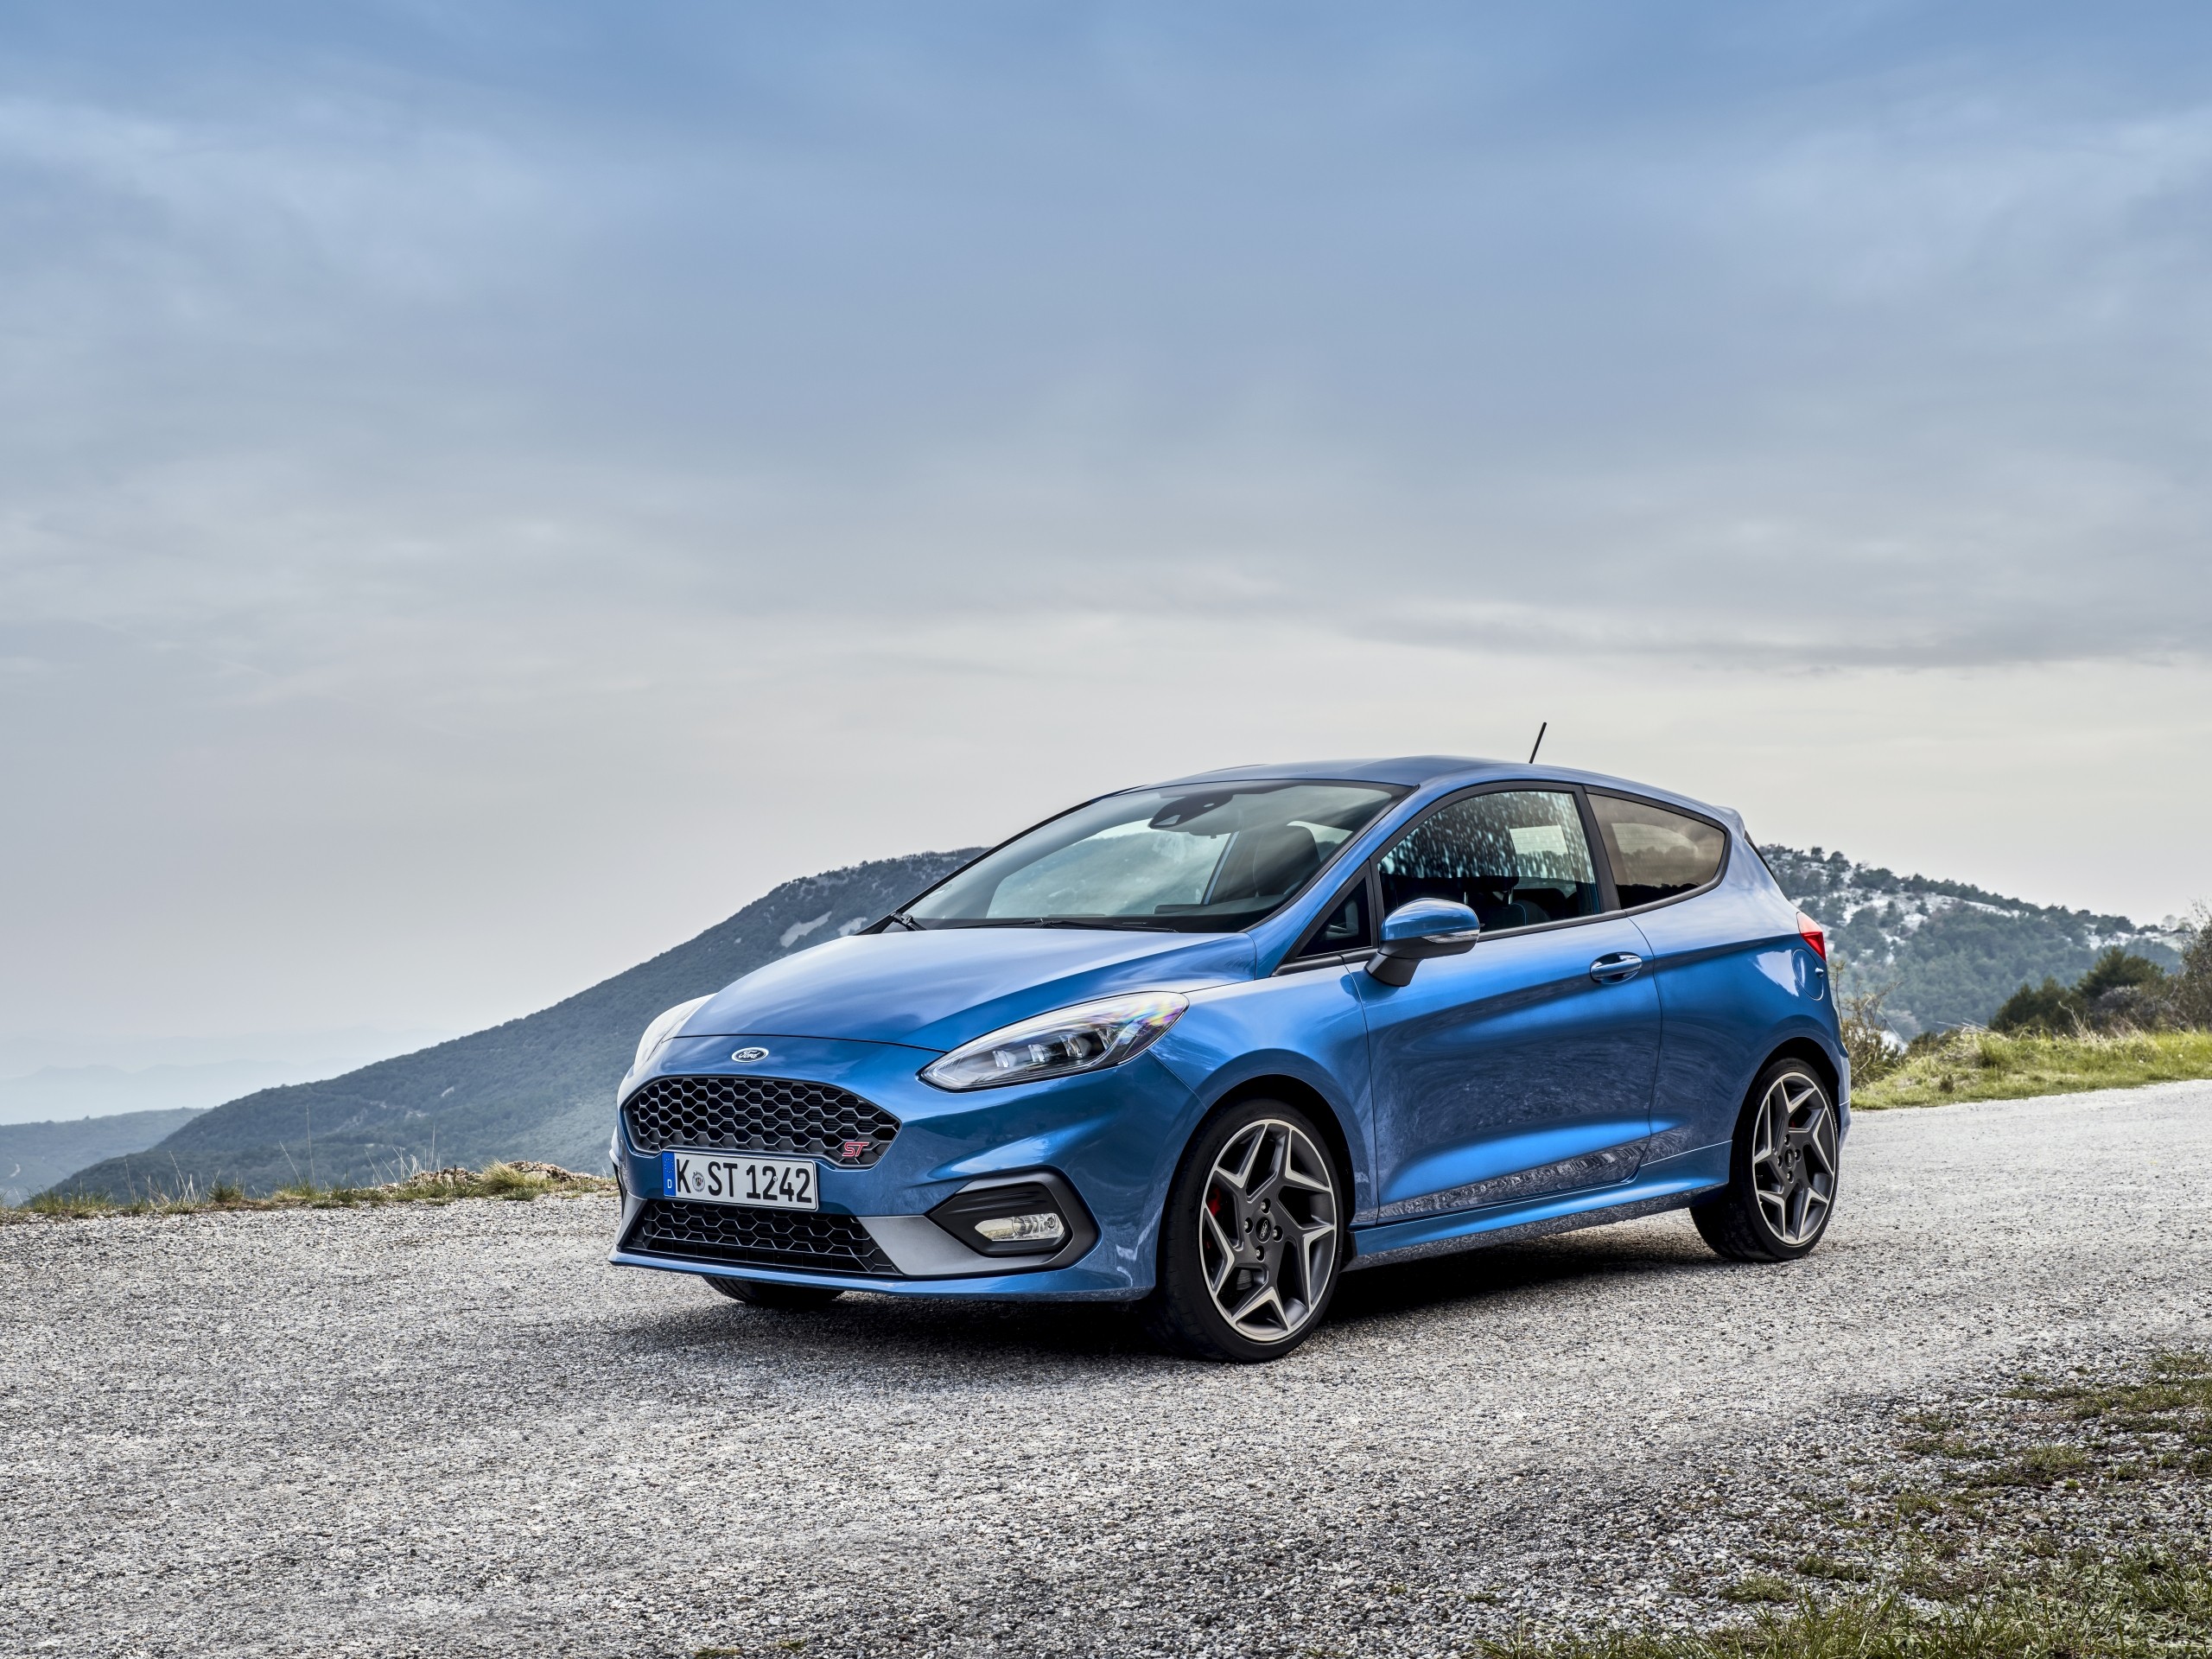 Ford Fiesta Production To End By The Middle Of 2023: Report